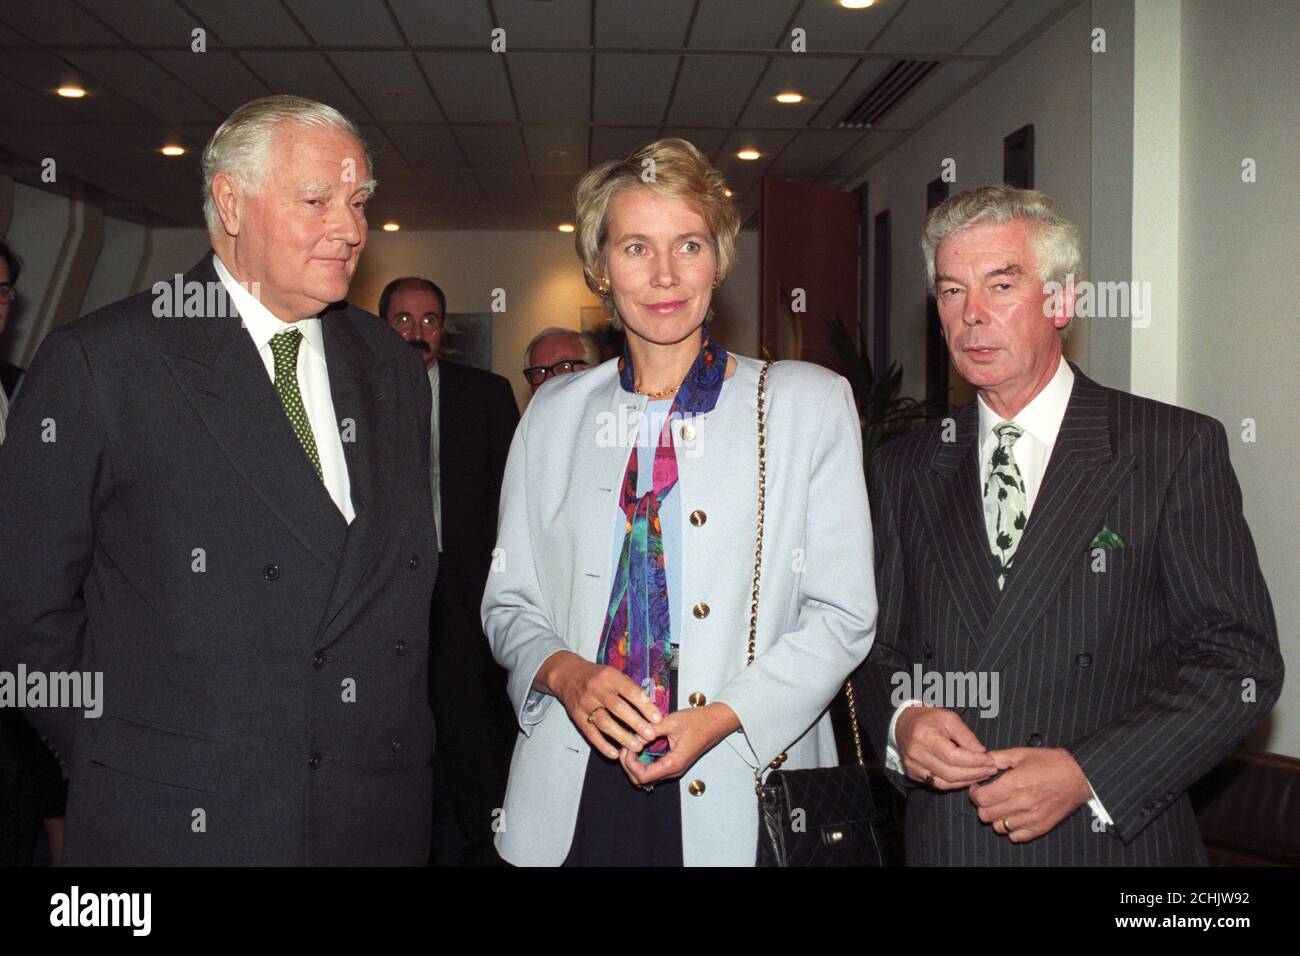 HERITAGE SECRETARY VIRGINIA BOTTOMLEY WITH LORD ROTHERMERE (LEFT), CHAIRMAN OF THE DAILY MAIL & GENERAL TRUST, & PA CHAIRMAN, HARRY ROCHE, AT THE PRESS ASSOCIATION'S NEW HEADQUARTERS IN LONDON.  Stock Photo